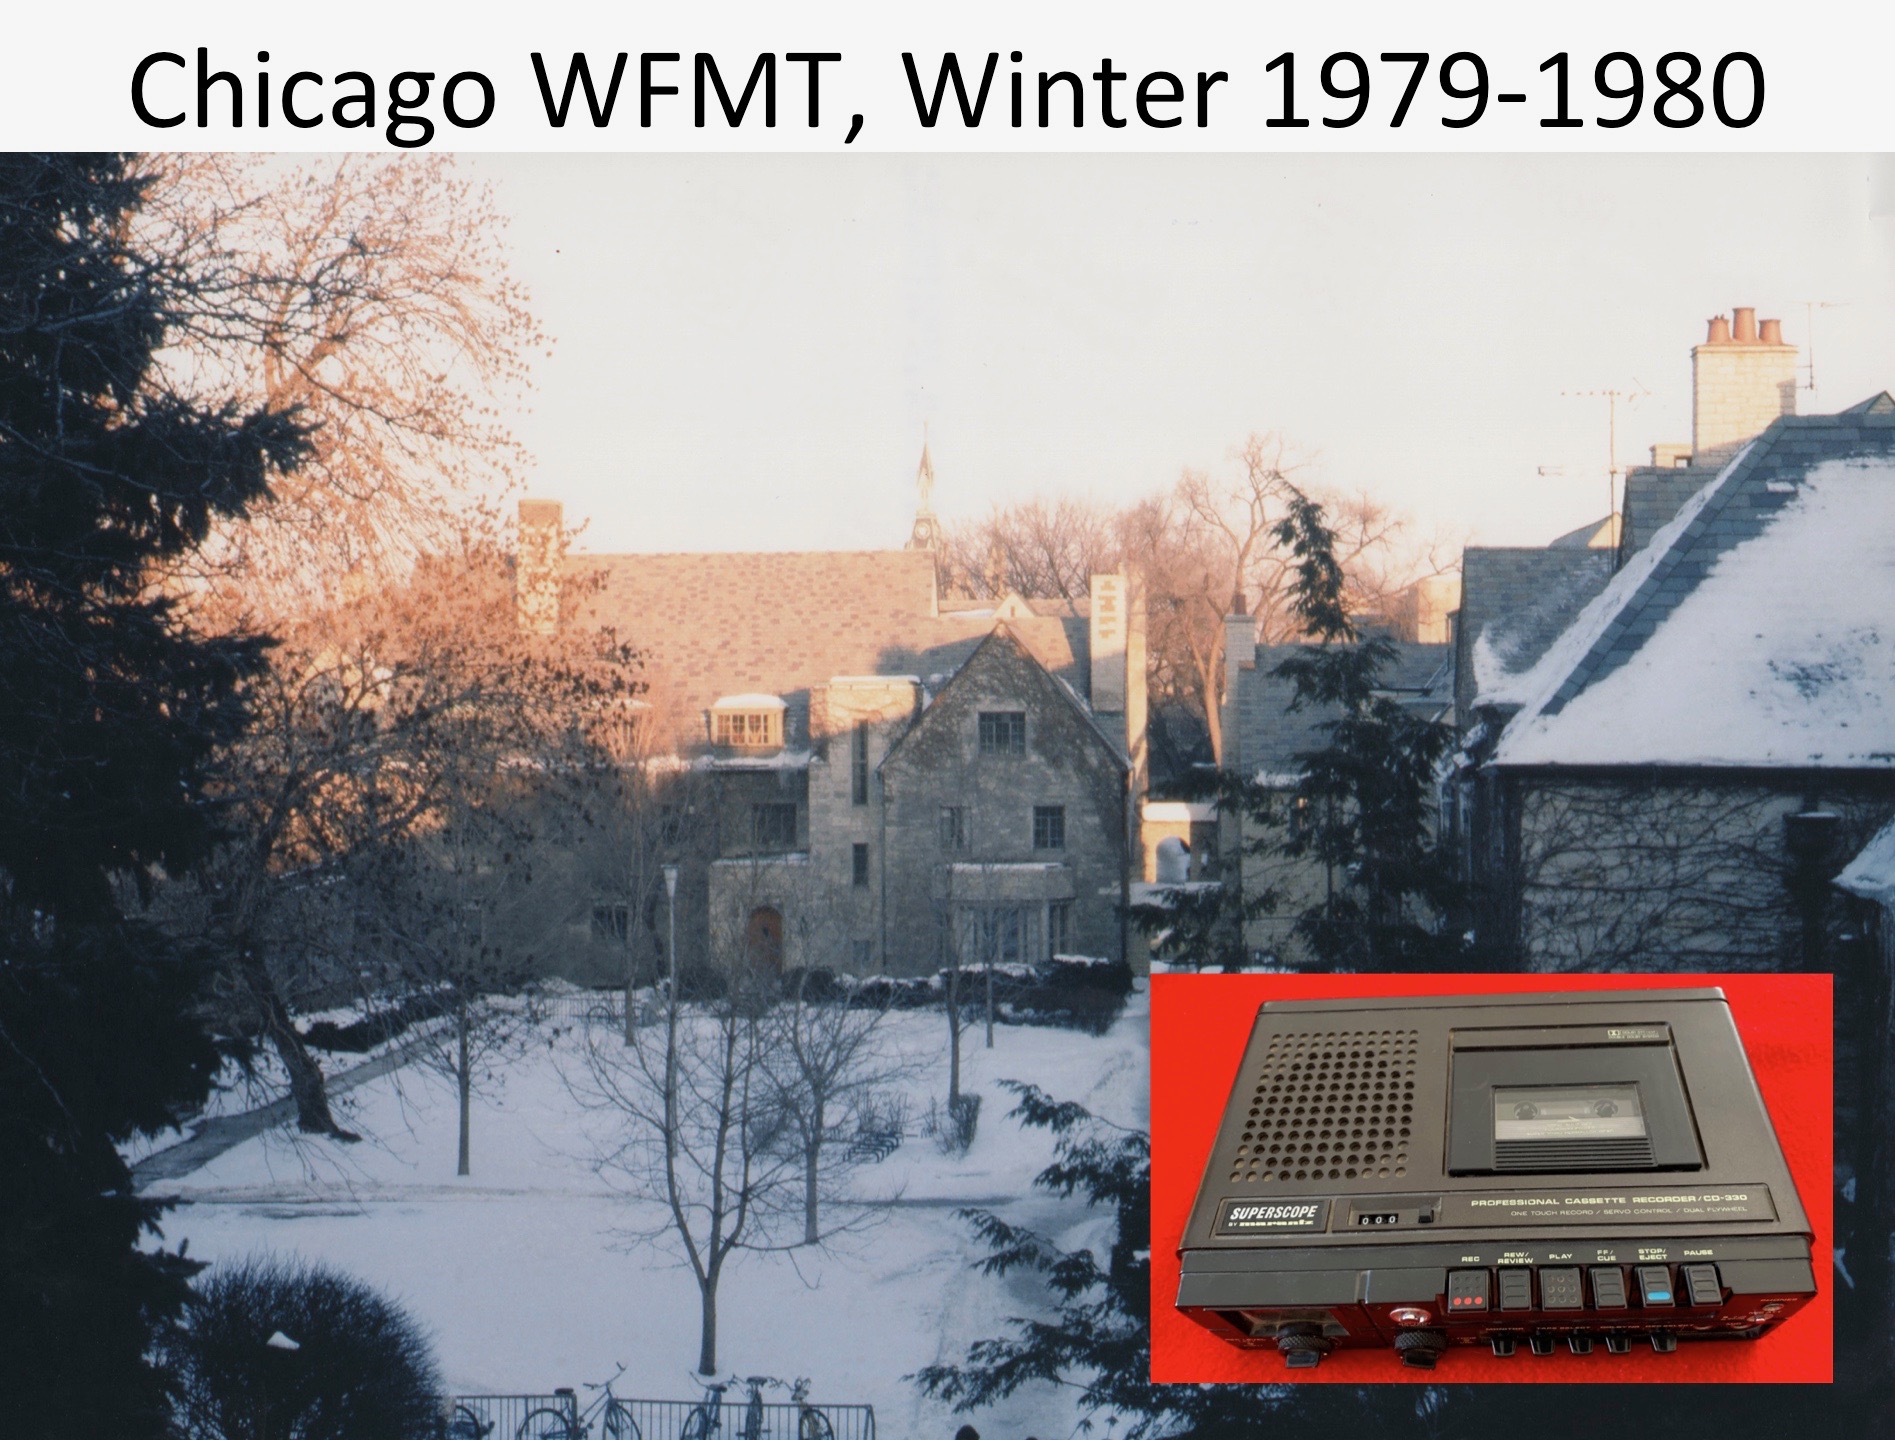 Photo of a snow-covered traditional college quad, viewed from the fourth floor of Willard Hall at Northwestern University in the winter of 1979-1980, with an inset photo of a SuperScope by Marantz cassette tape recorder.